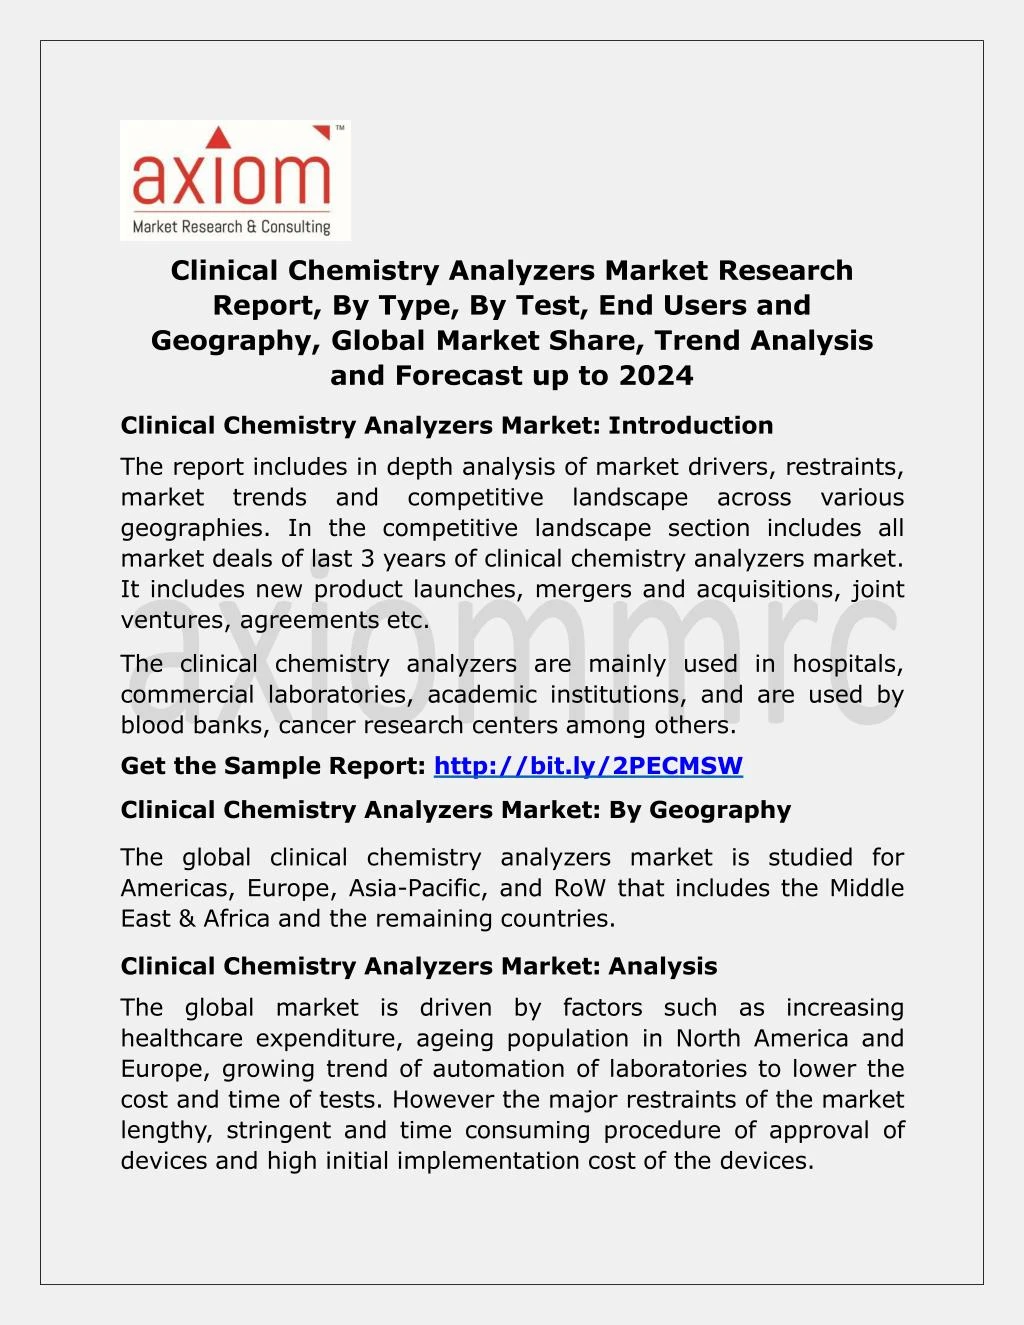 clinical chemistry analyzers market research